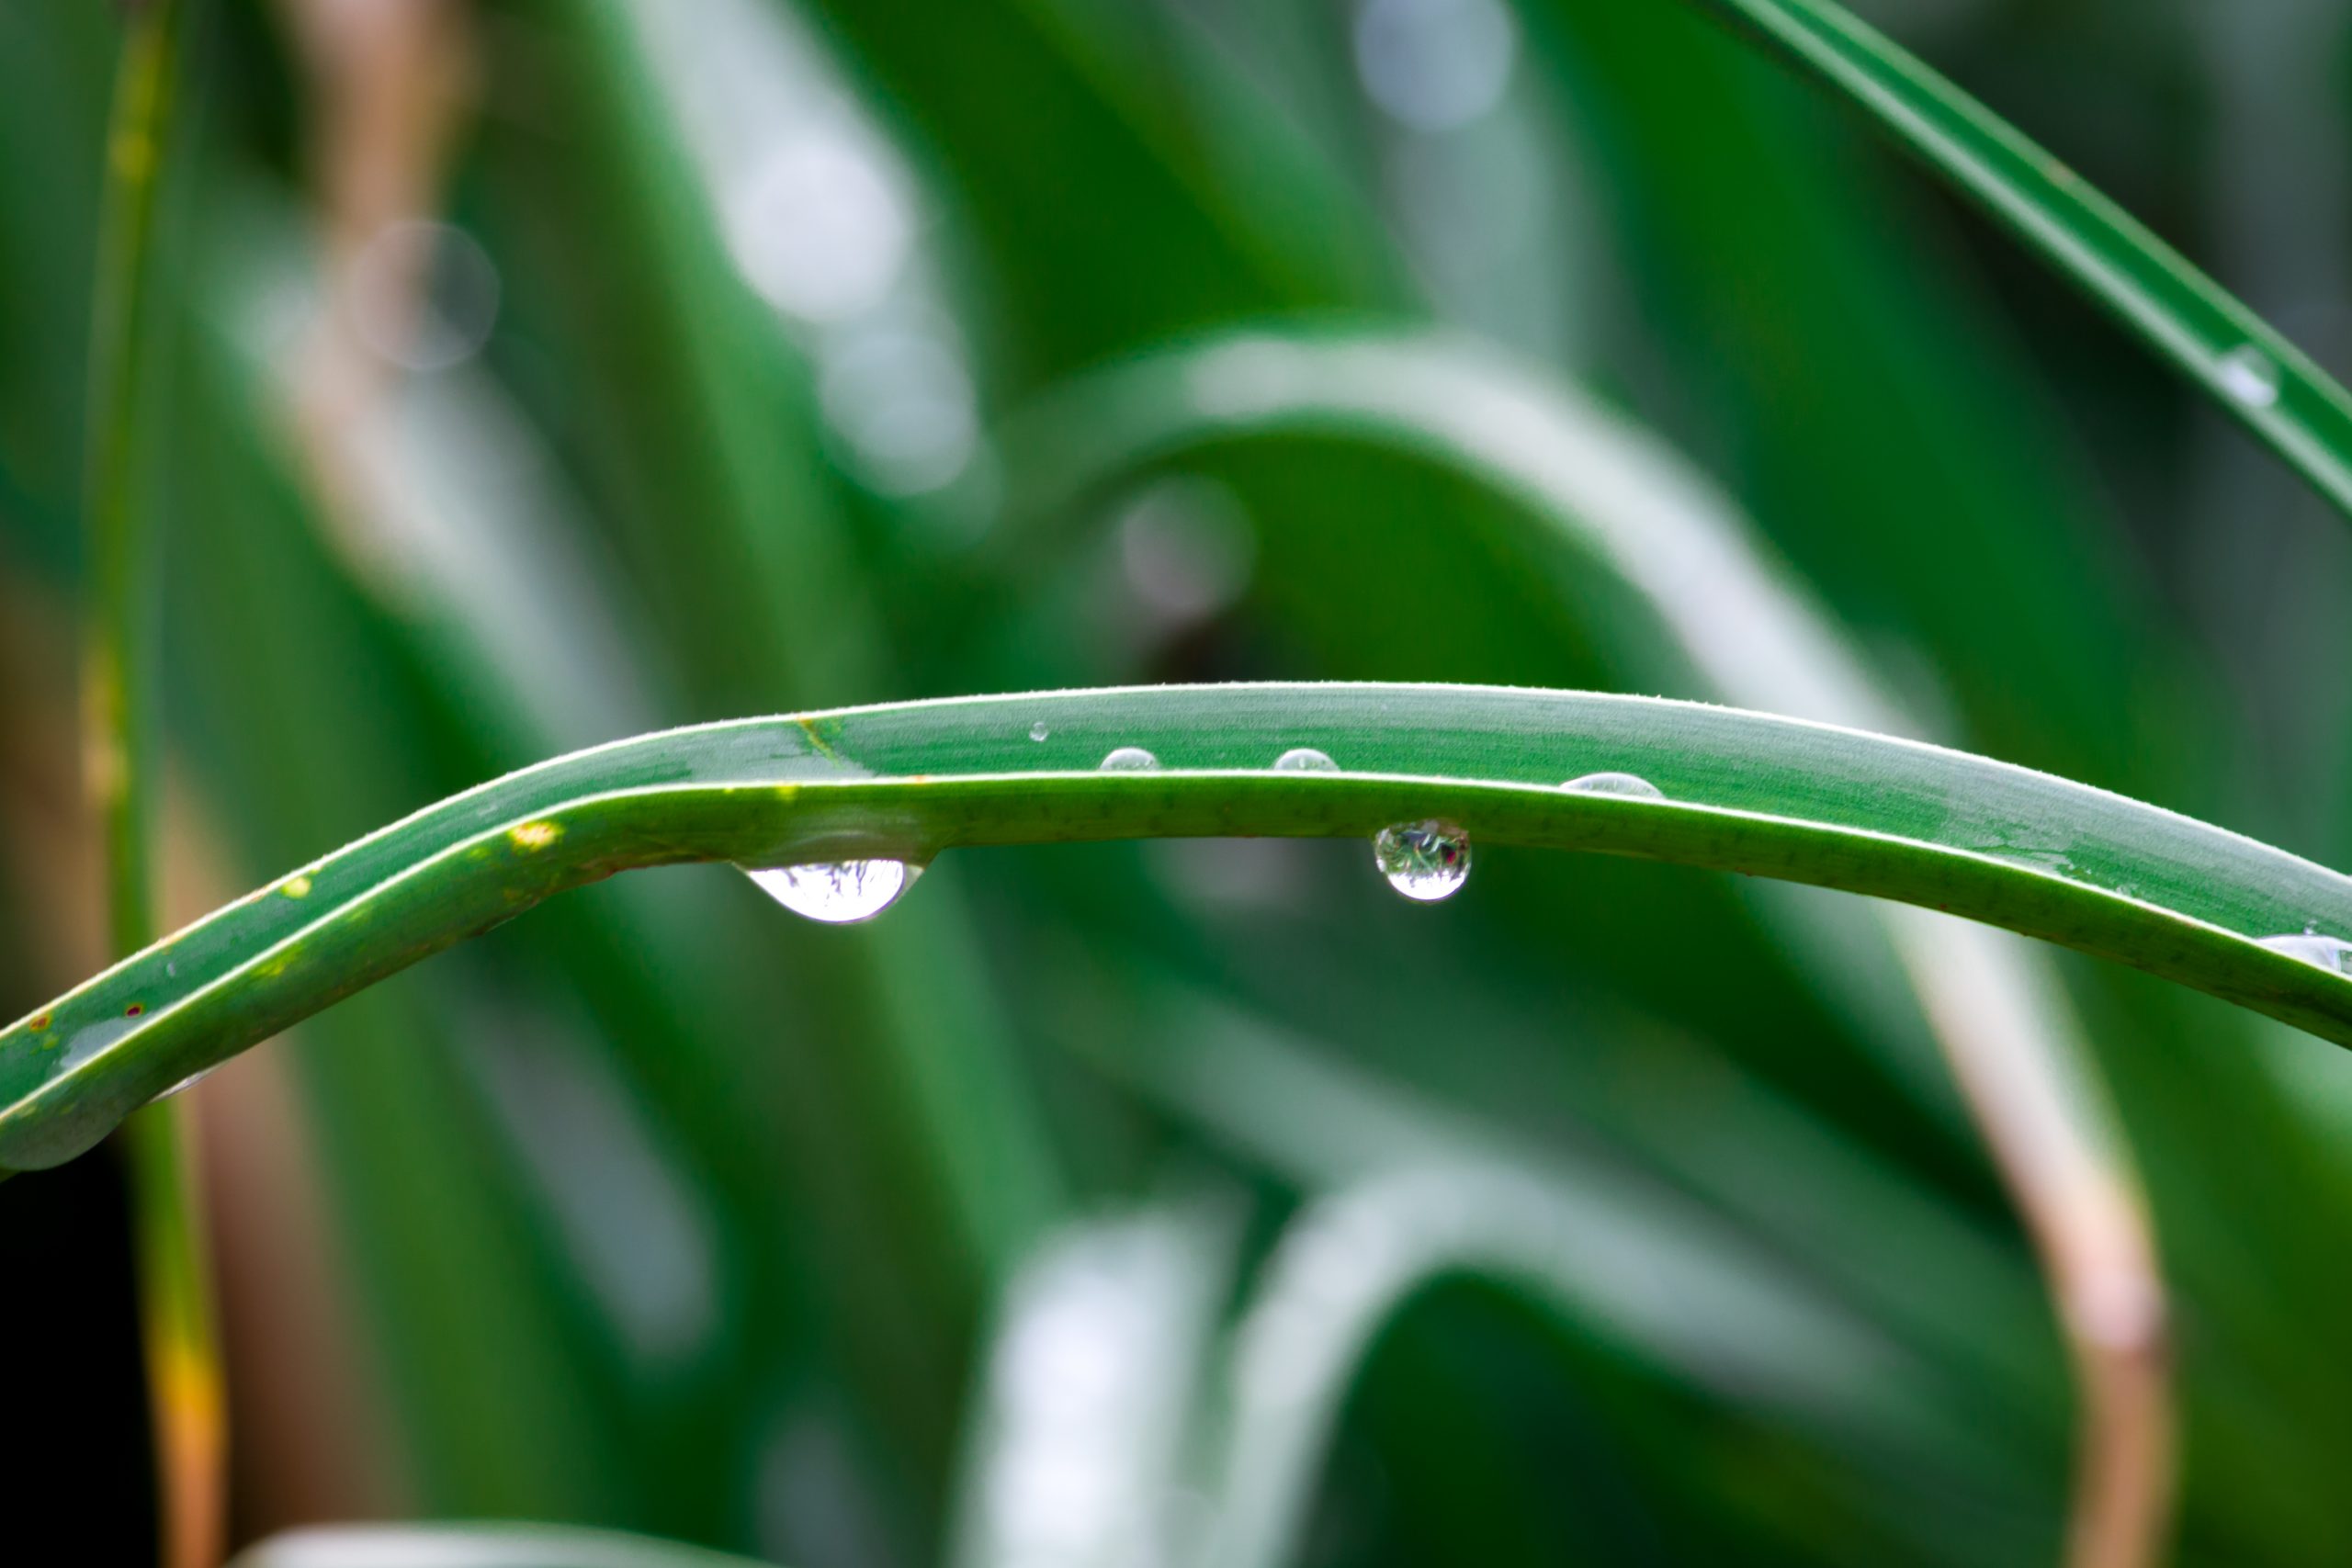 Water drops on a grass straw